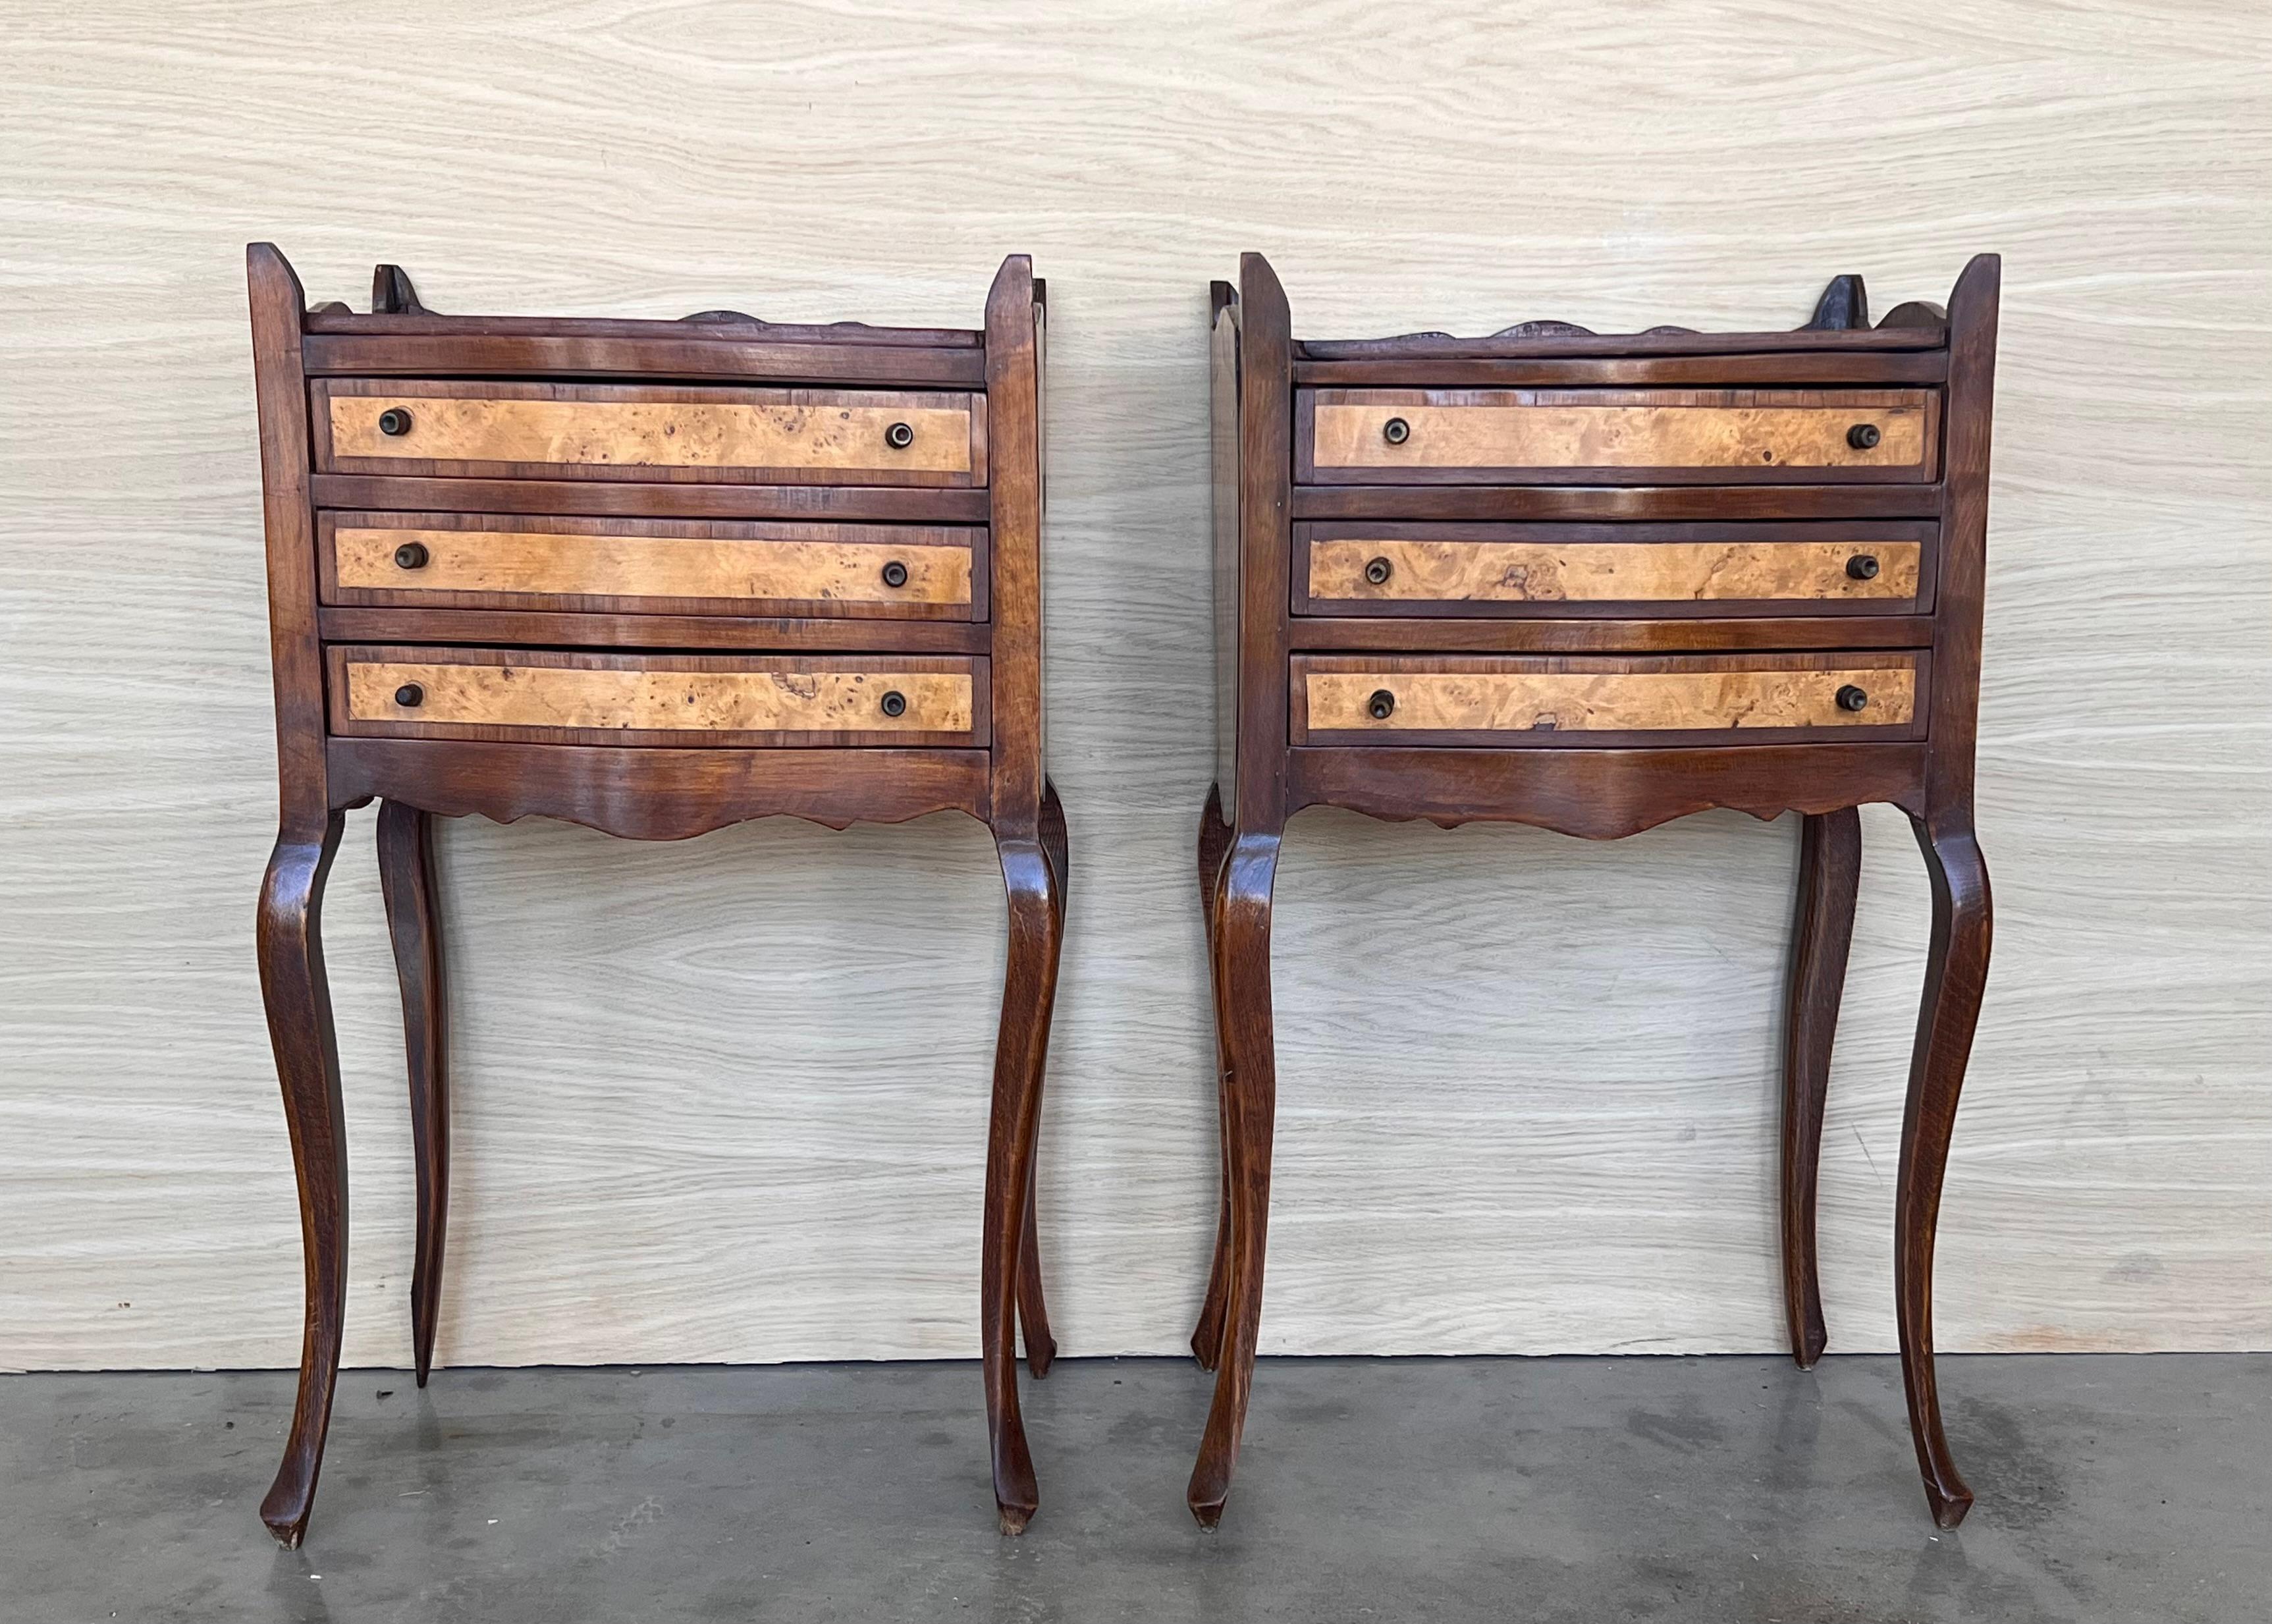 Elegant pair of coffee tables or bedside tables in antique Luis XV style from the 1940s, rare and fine in walnut. This pair of bedside tables has particularly slim legs. In the front they have three comfortable drawers. Pair of really wonderful